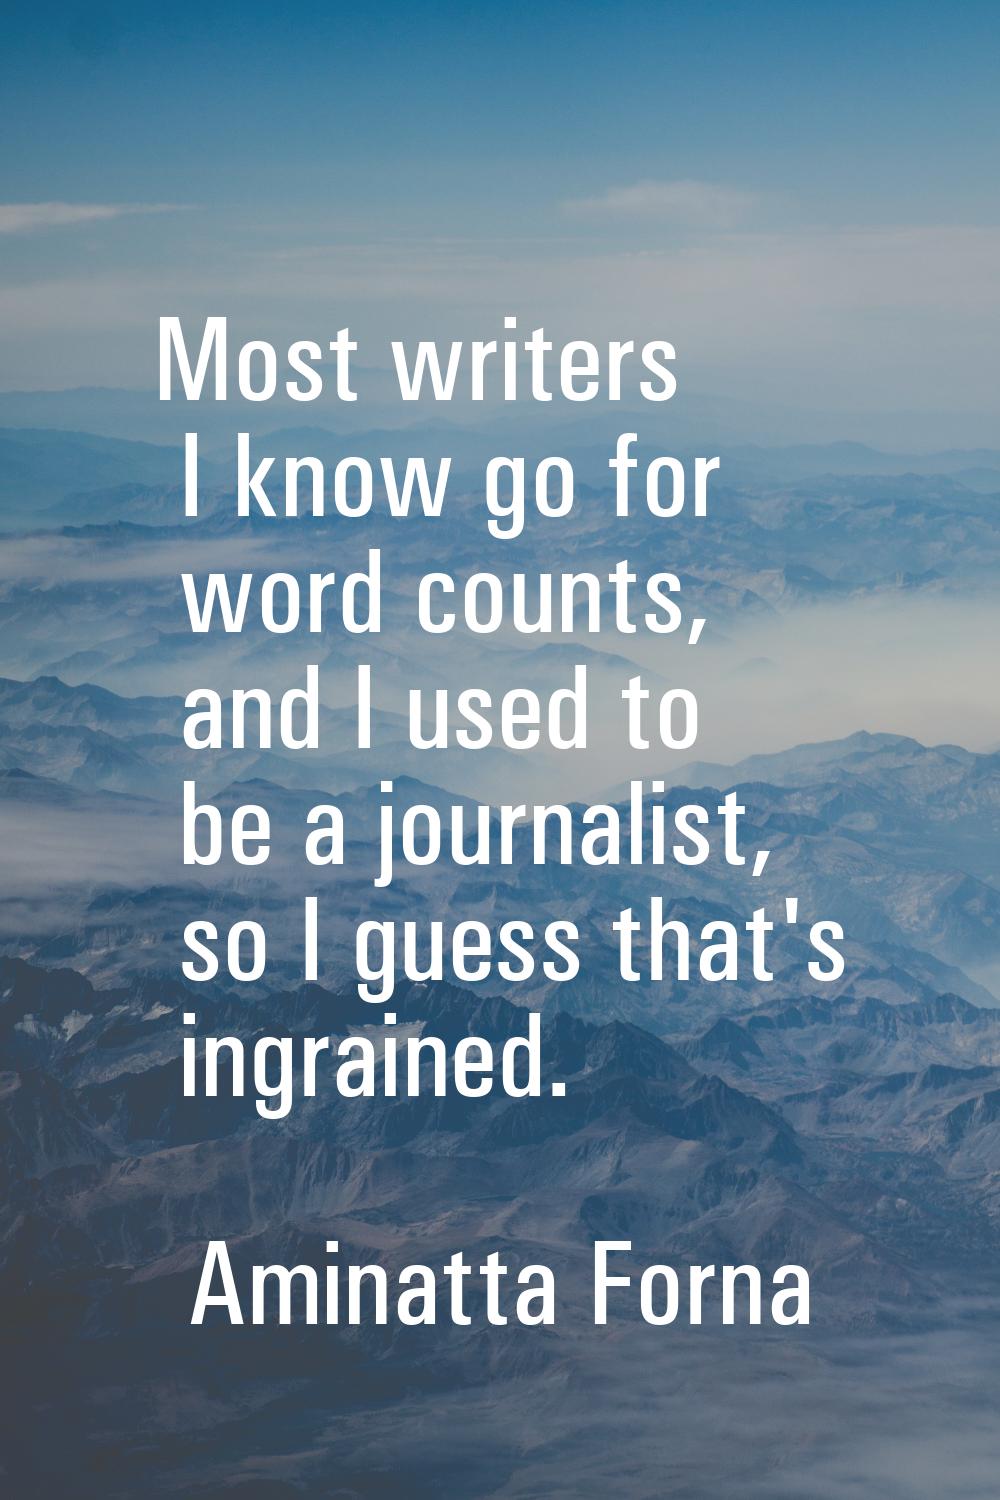 Most writers I know go for word counts, and I used to be a journalist, so I guess that's ingrained.